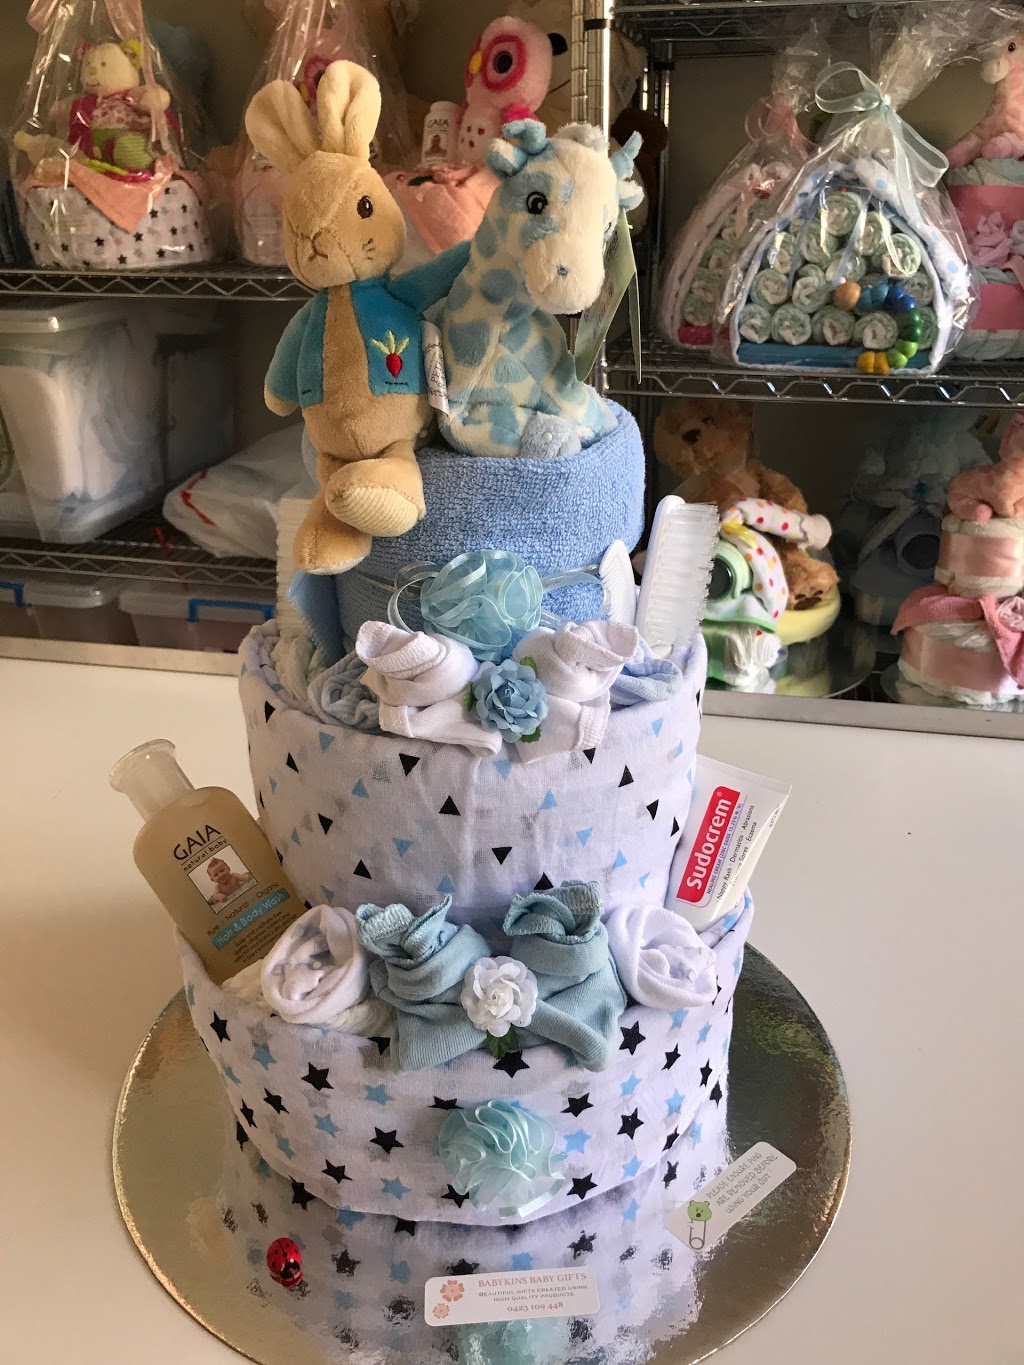 Babykins Baby Gifts - Nappy Cakes and Baby Gifts | clothing store | 3 Amstel Mews, Cranbourne VIC 3977, Australia | 0423109448 OR +61 423 109 448